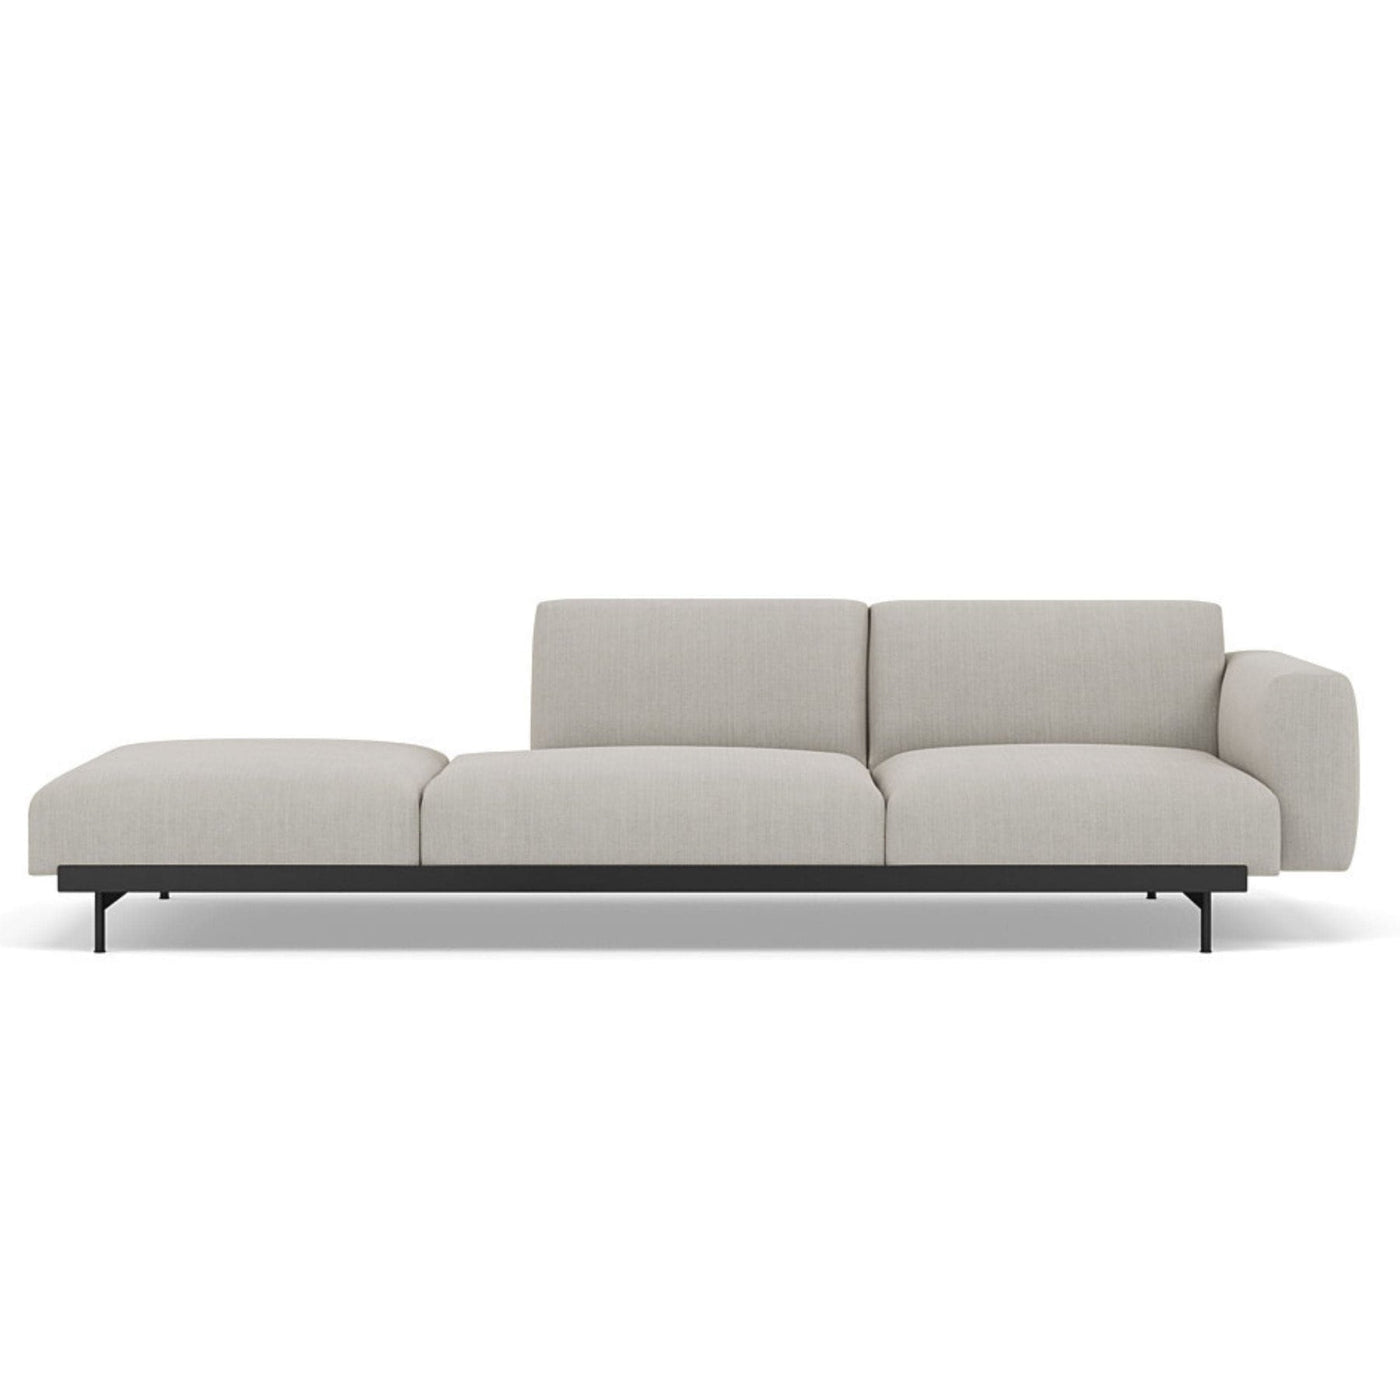 Muuto In Situ Modular 3 Seater Sofa, configuration 4. Made to order from someday designs. #colour_fiord-201